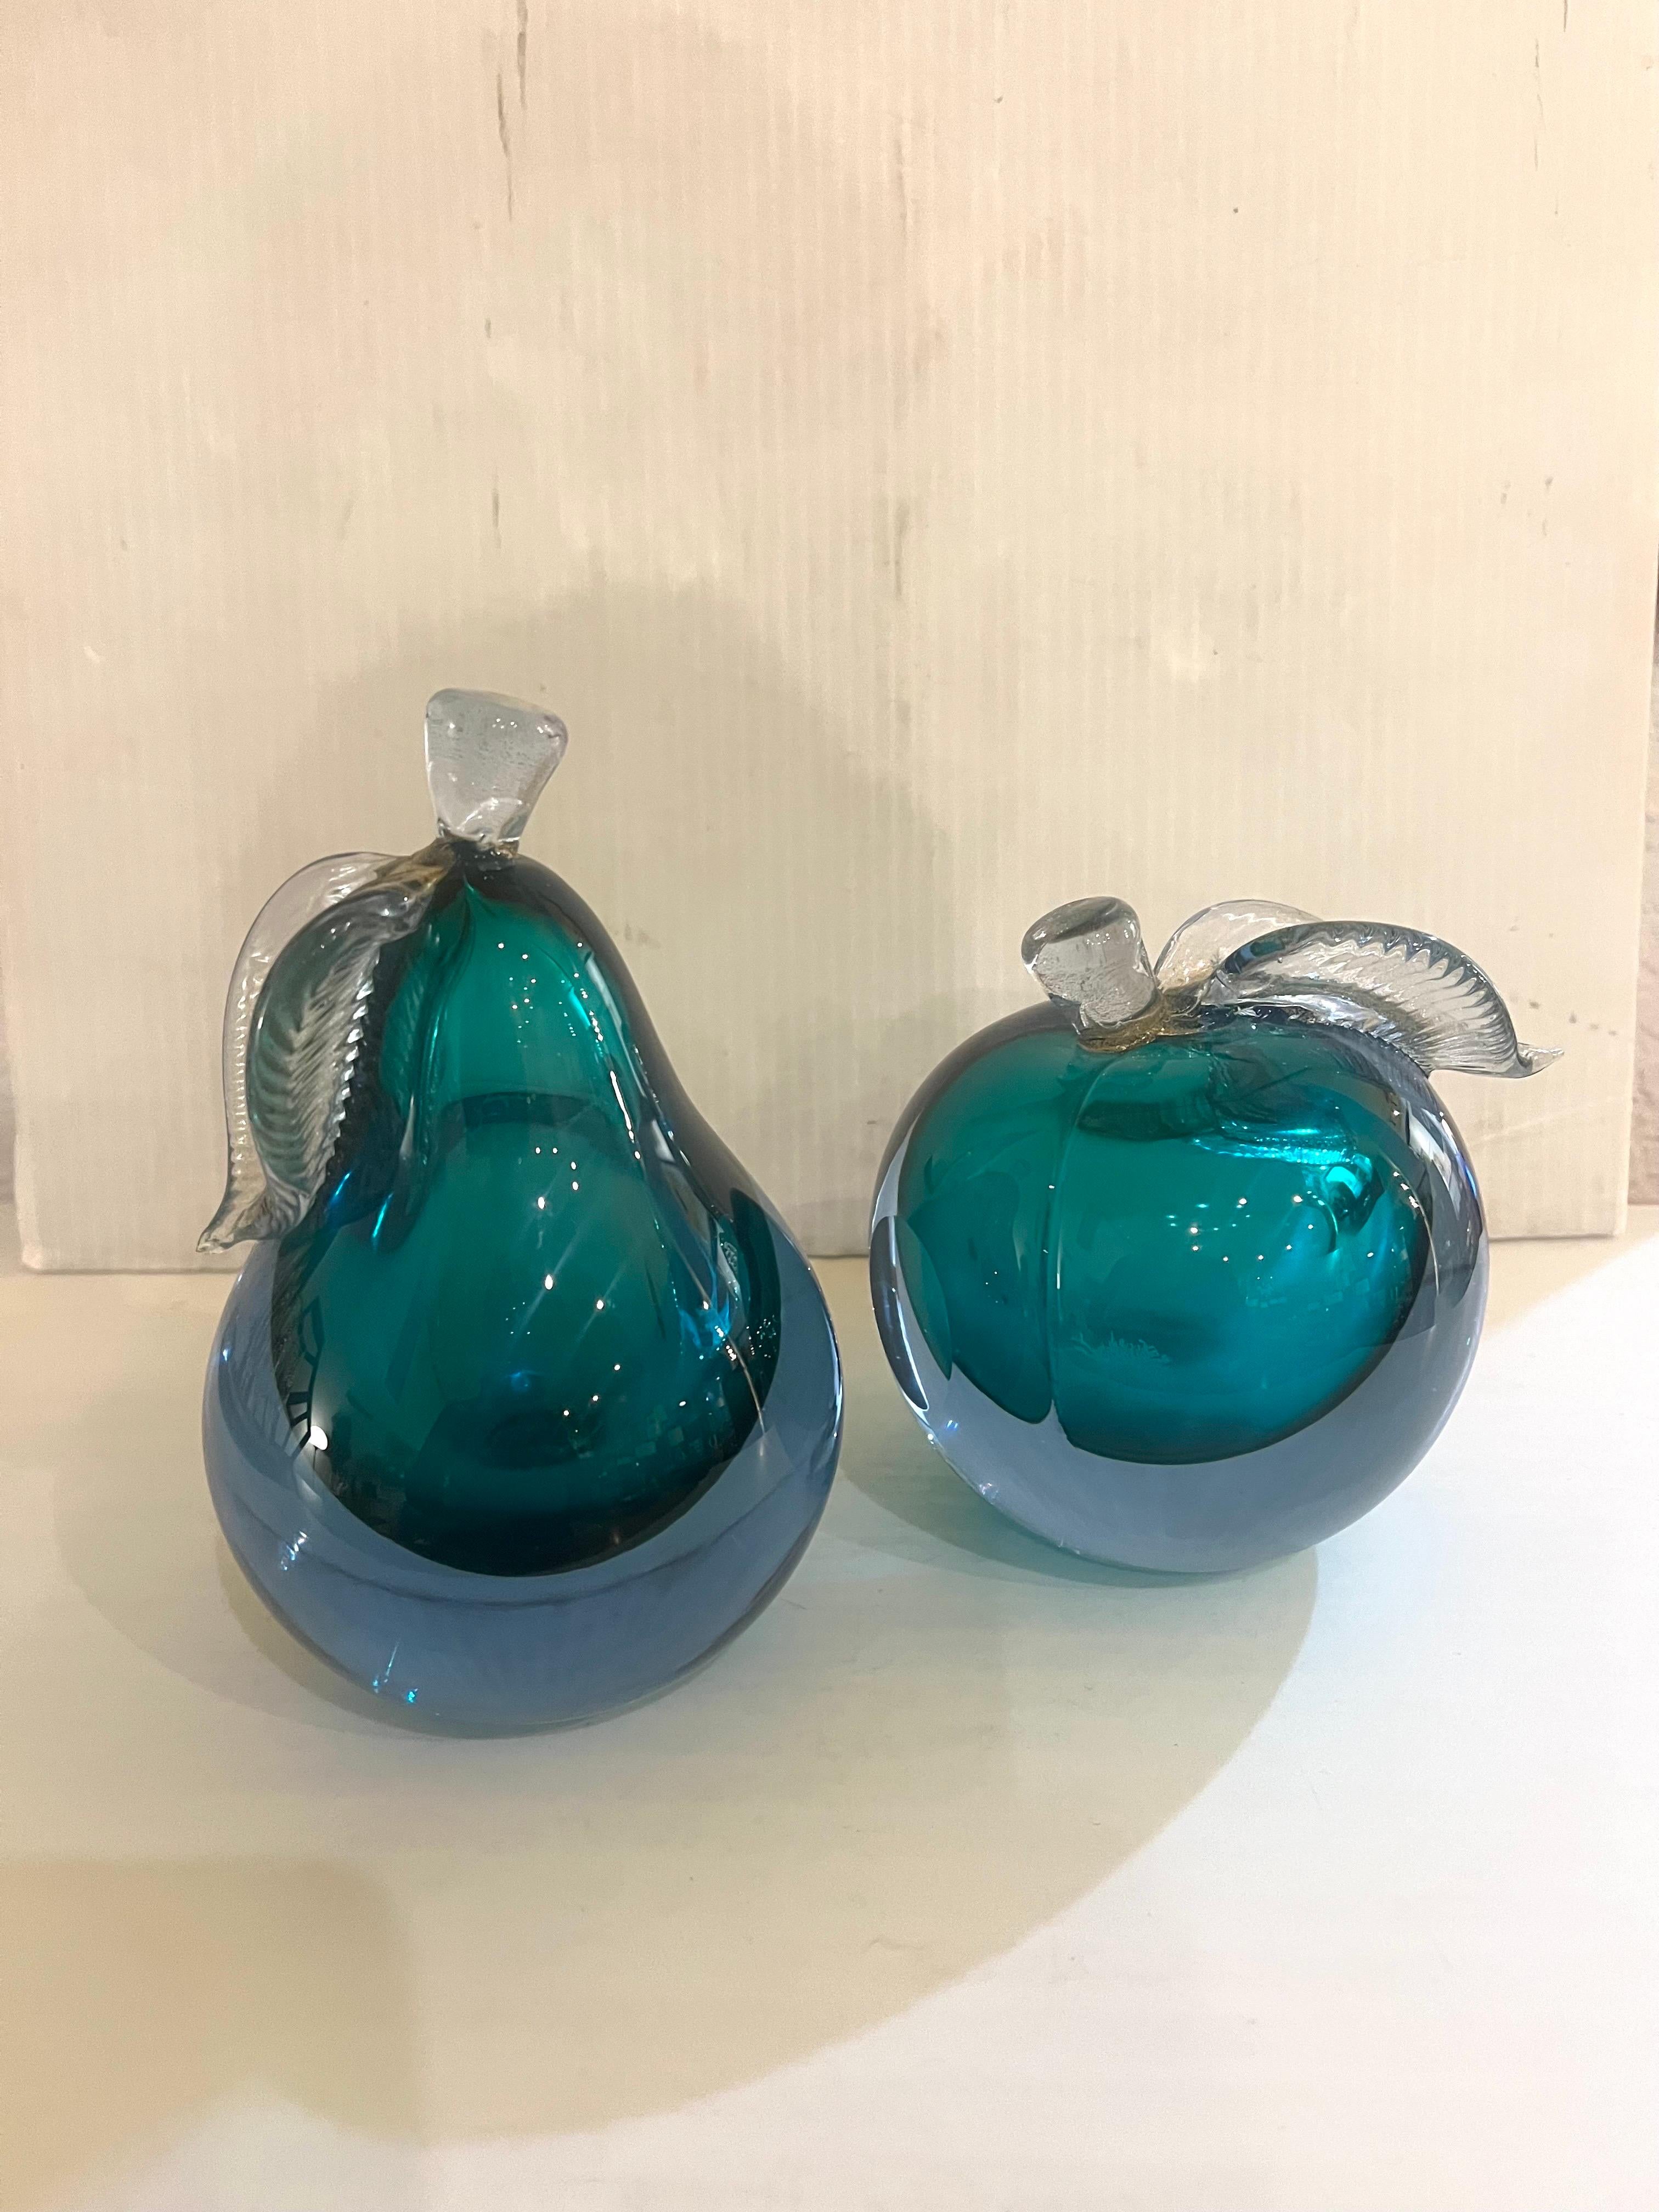 Blown Glass Livio Seguso Venetian Murano Italy Art Glass Apple and Pear Bookends Sculptures For Sale